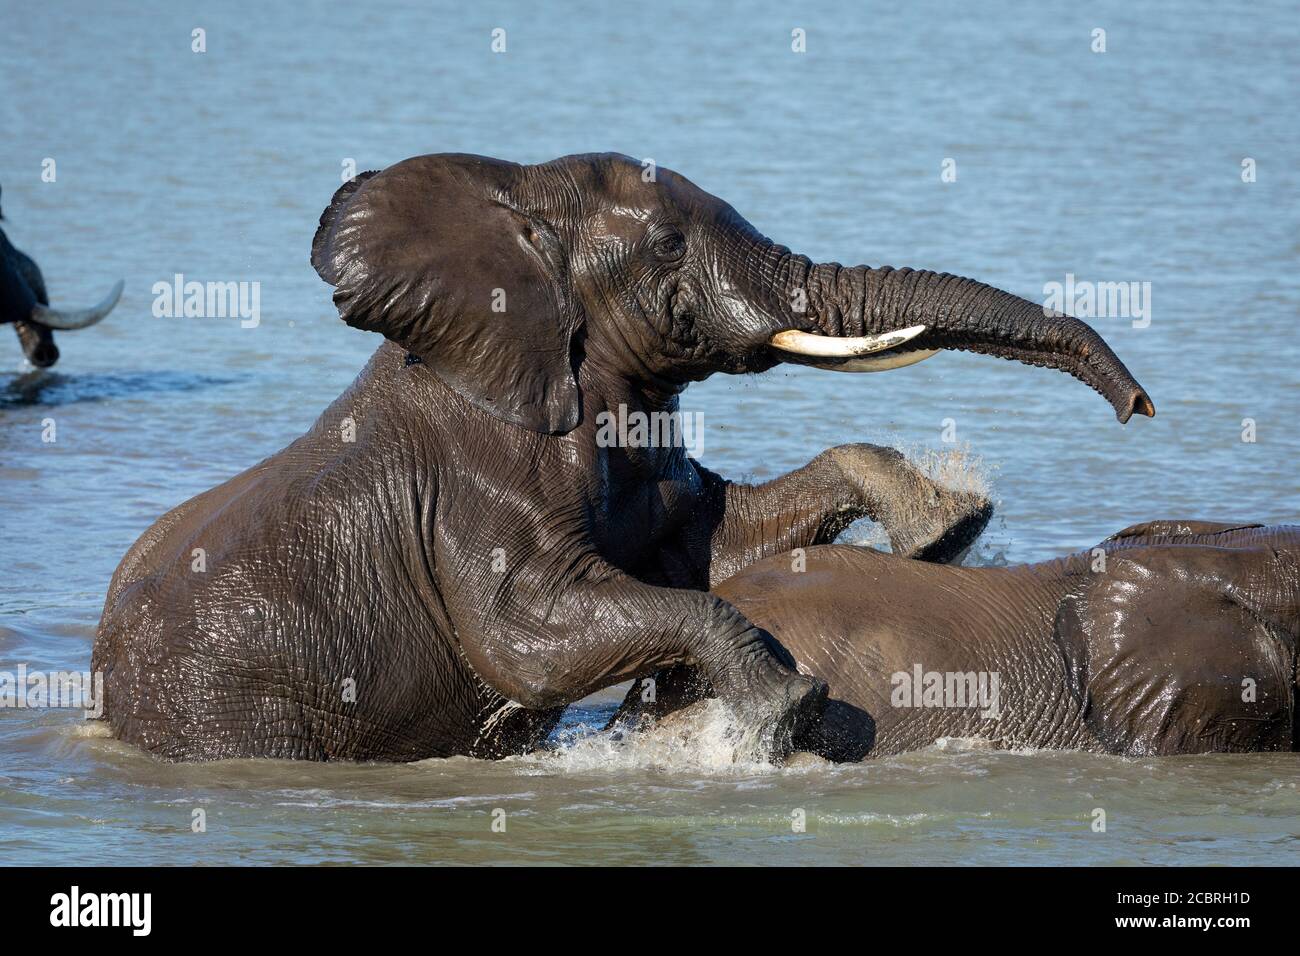 Two elephants playing in water splashing in Kruger Park South Africa Stock Photo